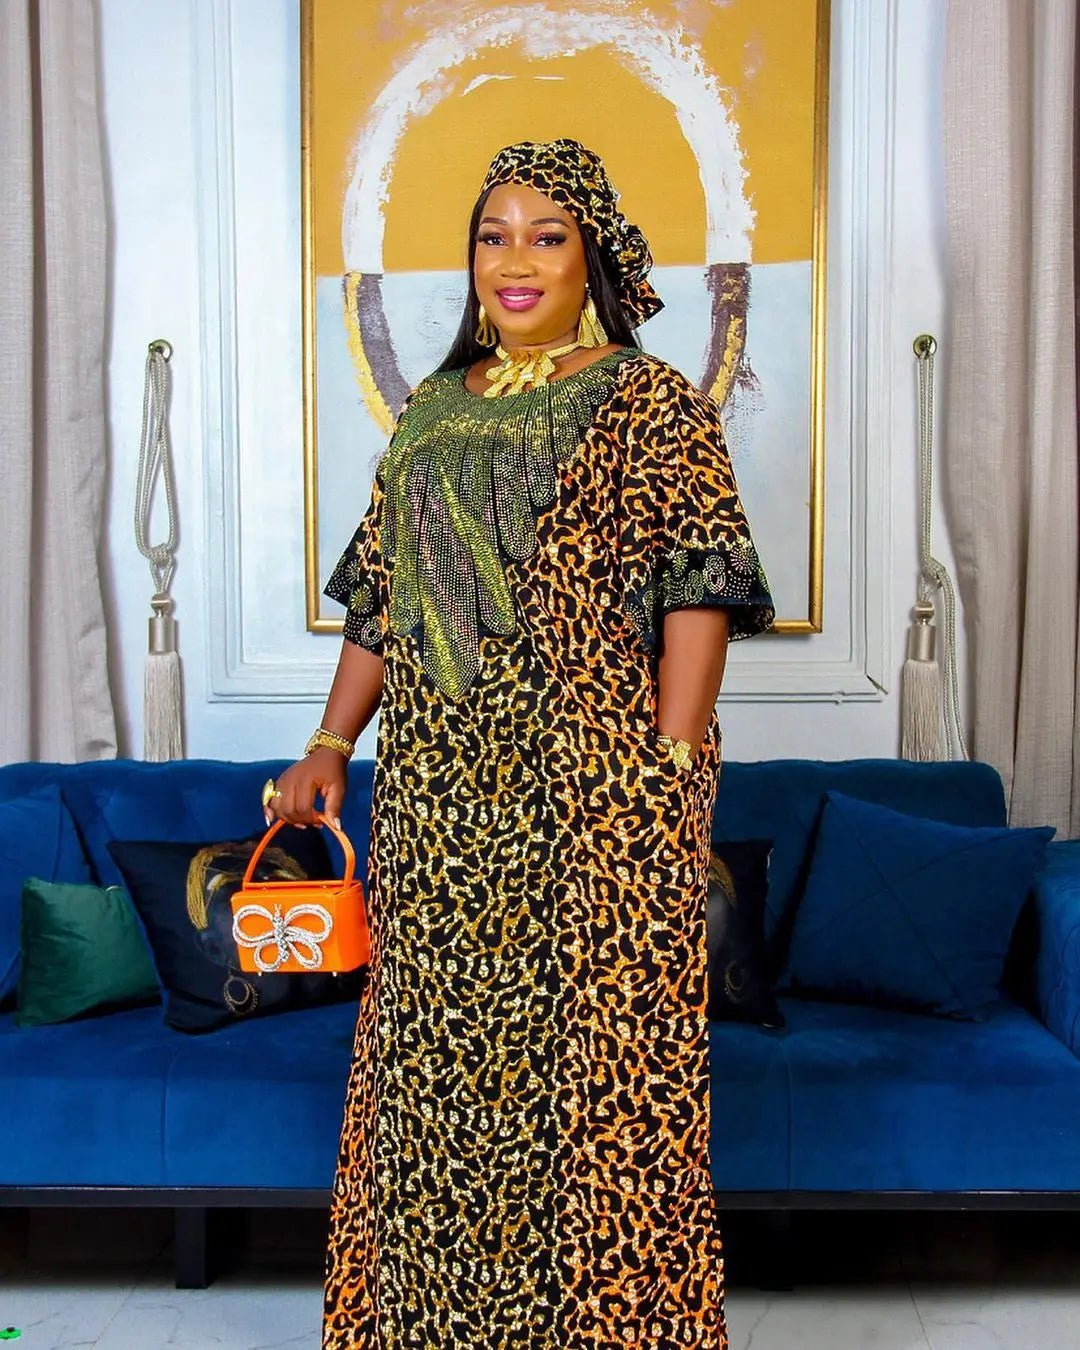 African-Inspired Women's Fashion: Abayas, Boubous, Dashikis, and Ankara Outfits for Evening Wear - Flexi Africa - Flexi Africa offers Free Delivery Worldwide - Vibrant African traditional clothing showcasing bold prints and intricate designs